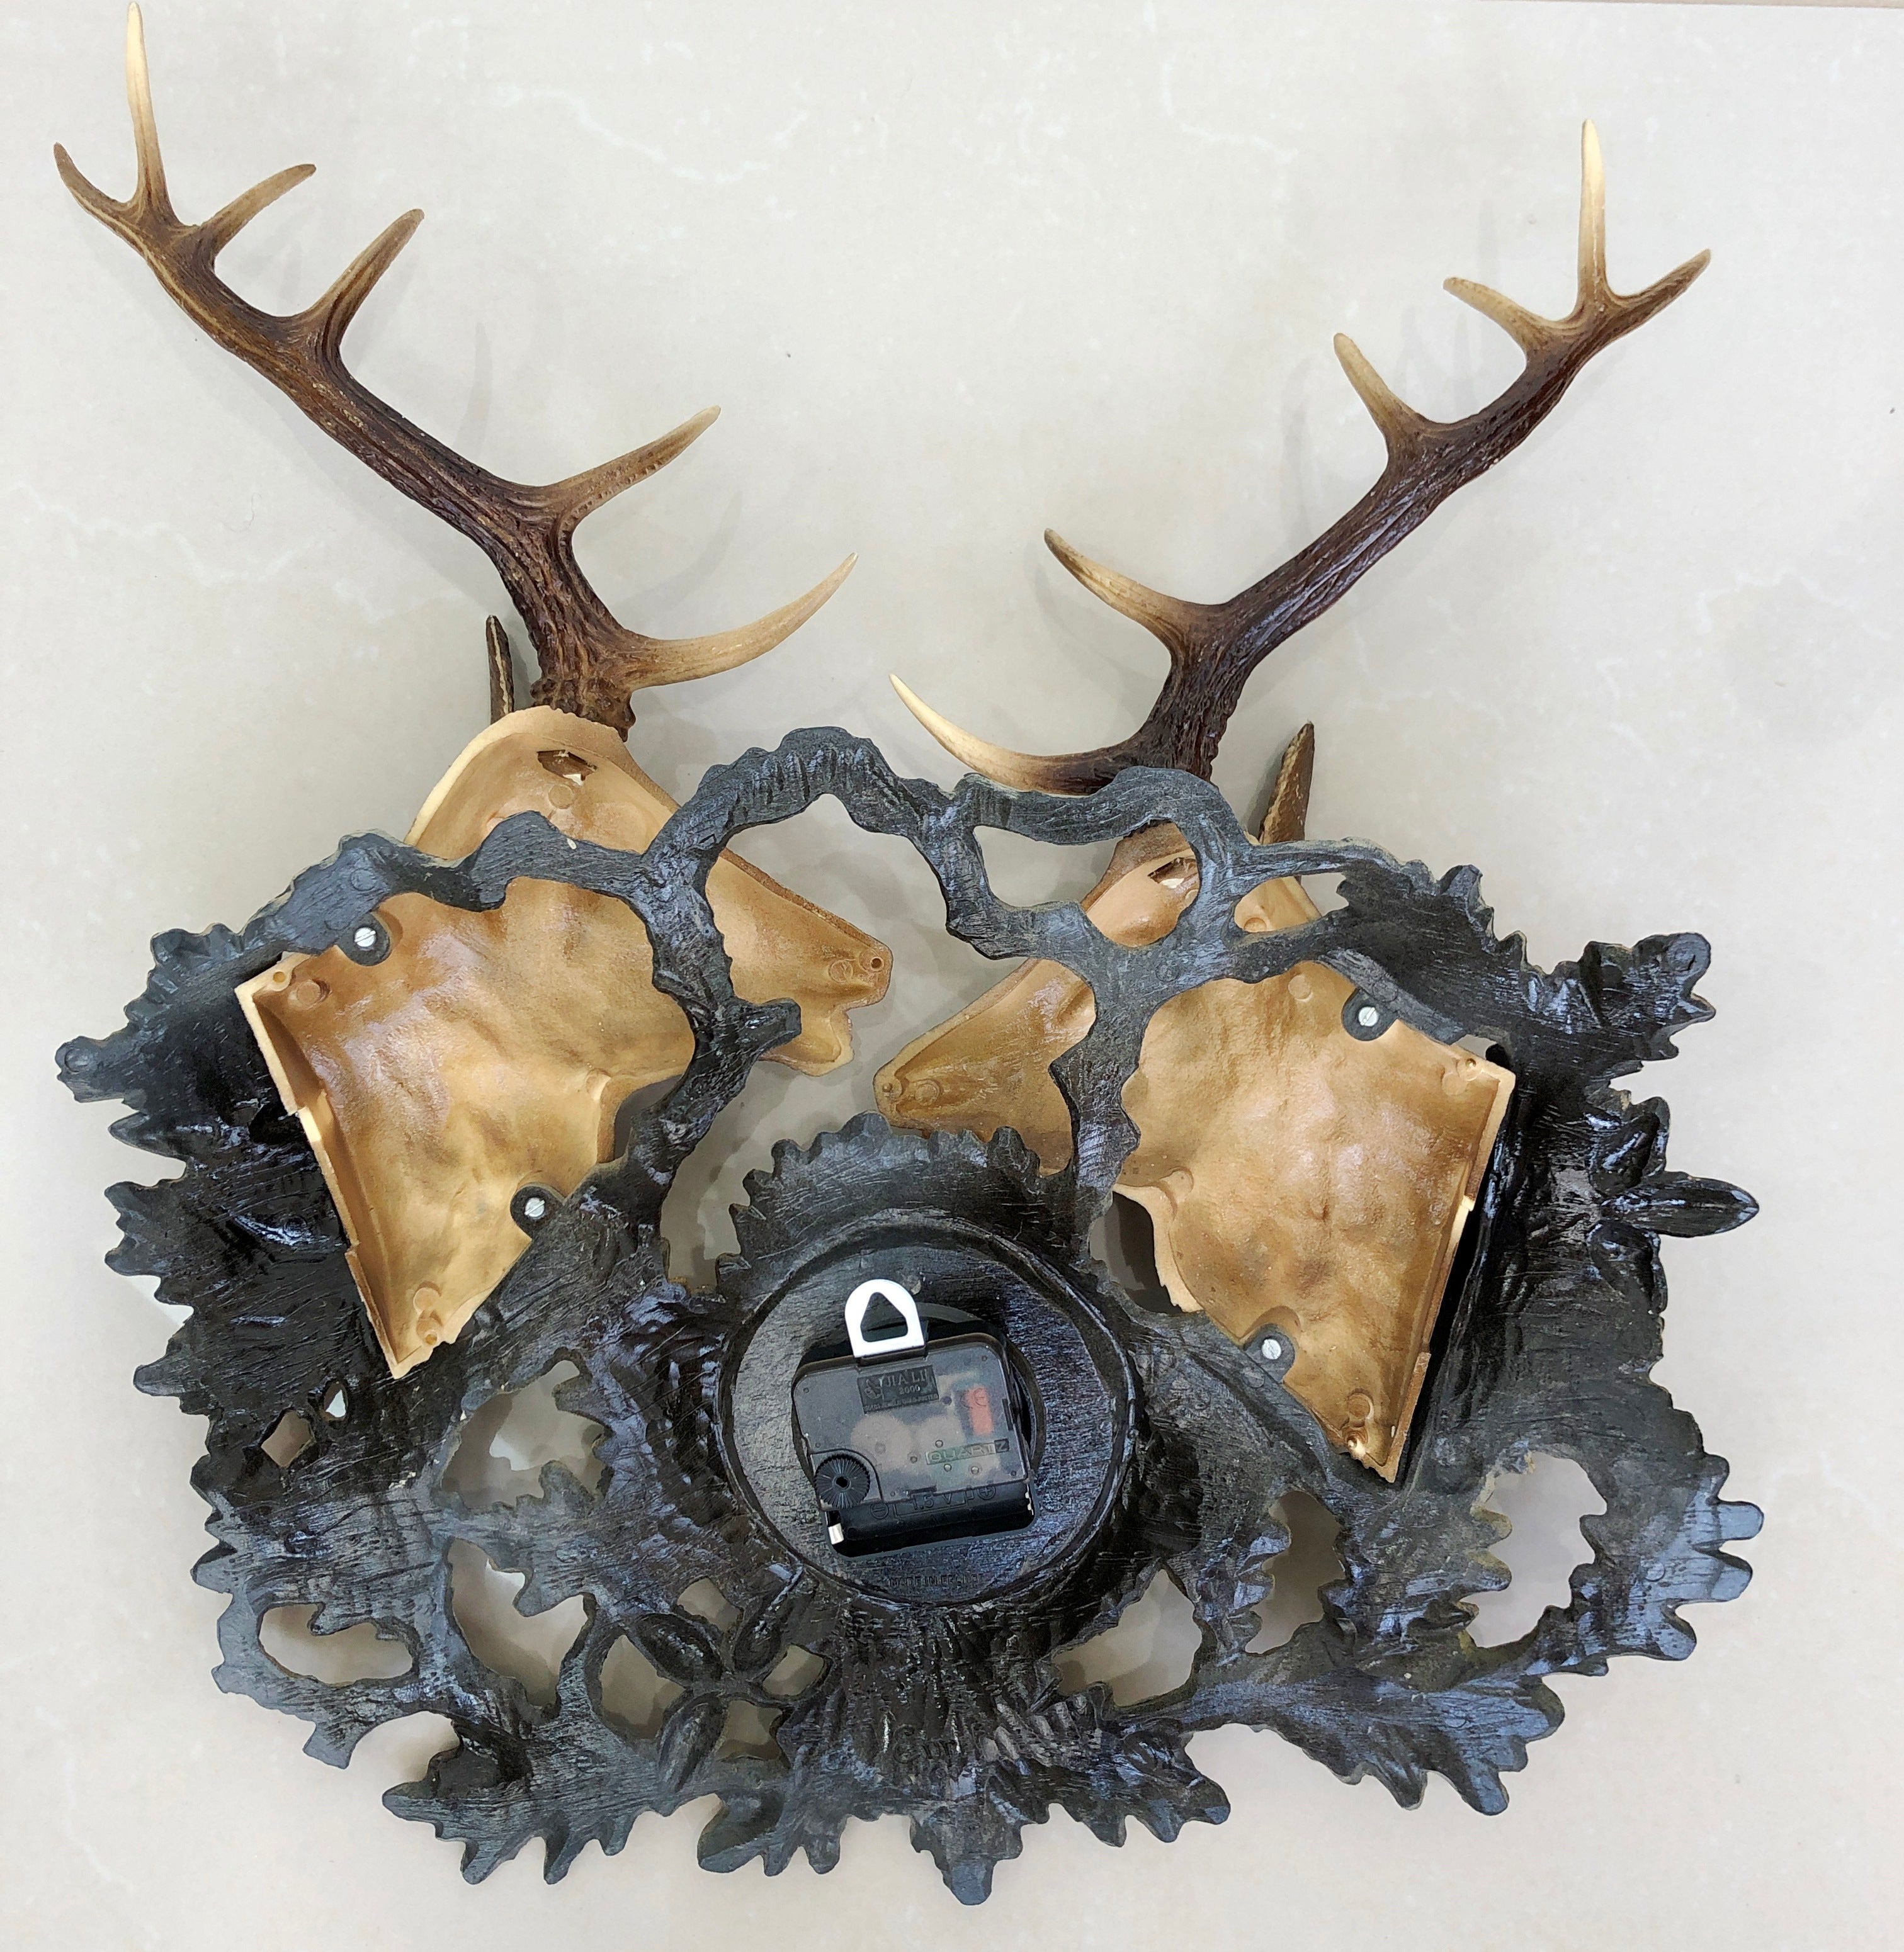 Vintage Stag Deer Battery Wall Clock | eXibit collection